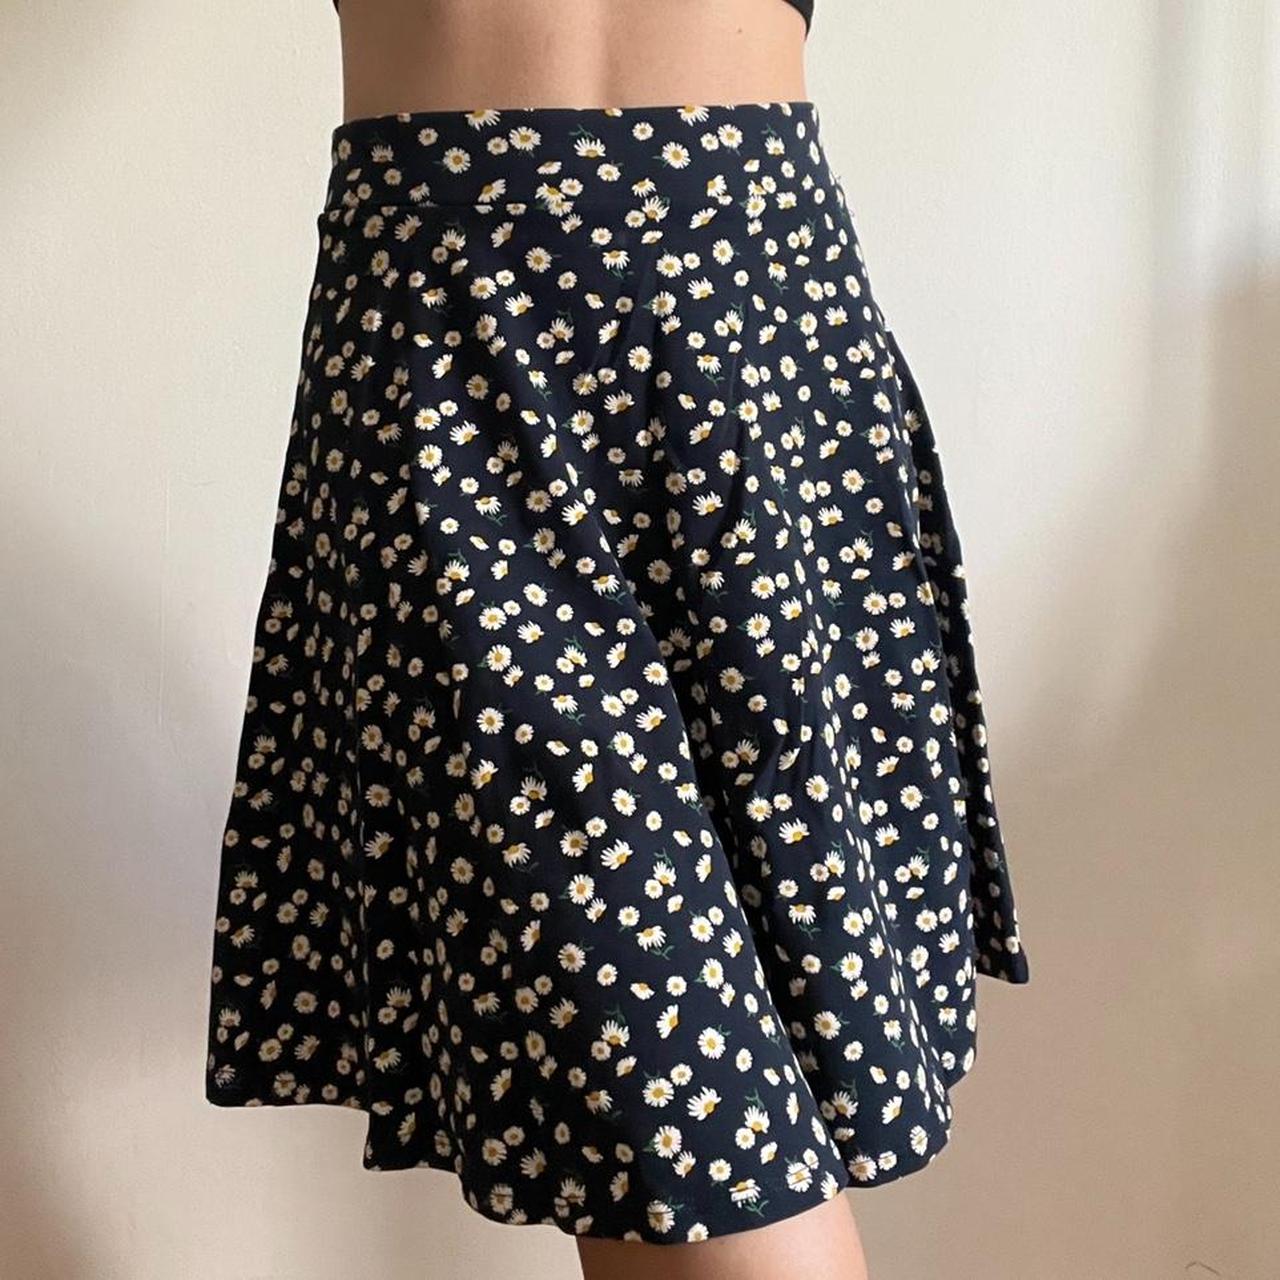 Superdry Women's Blue and Navy Skirt